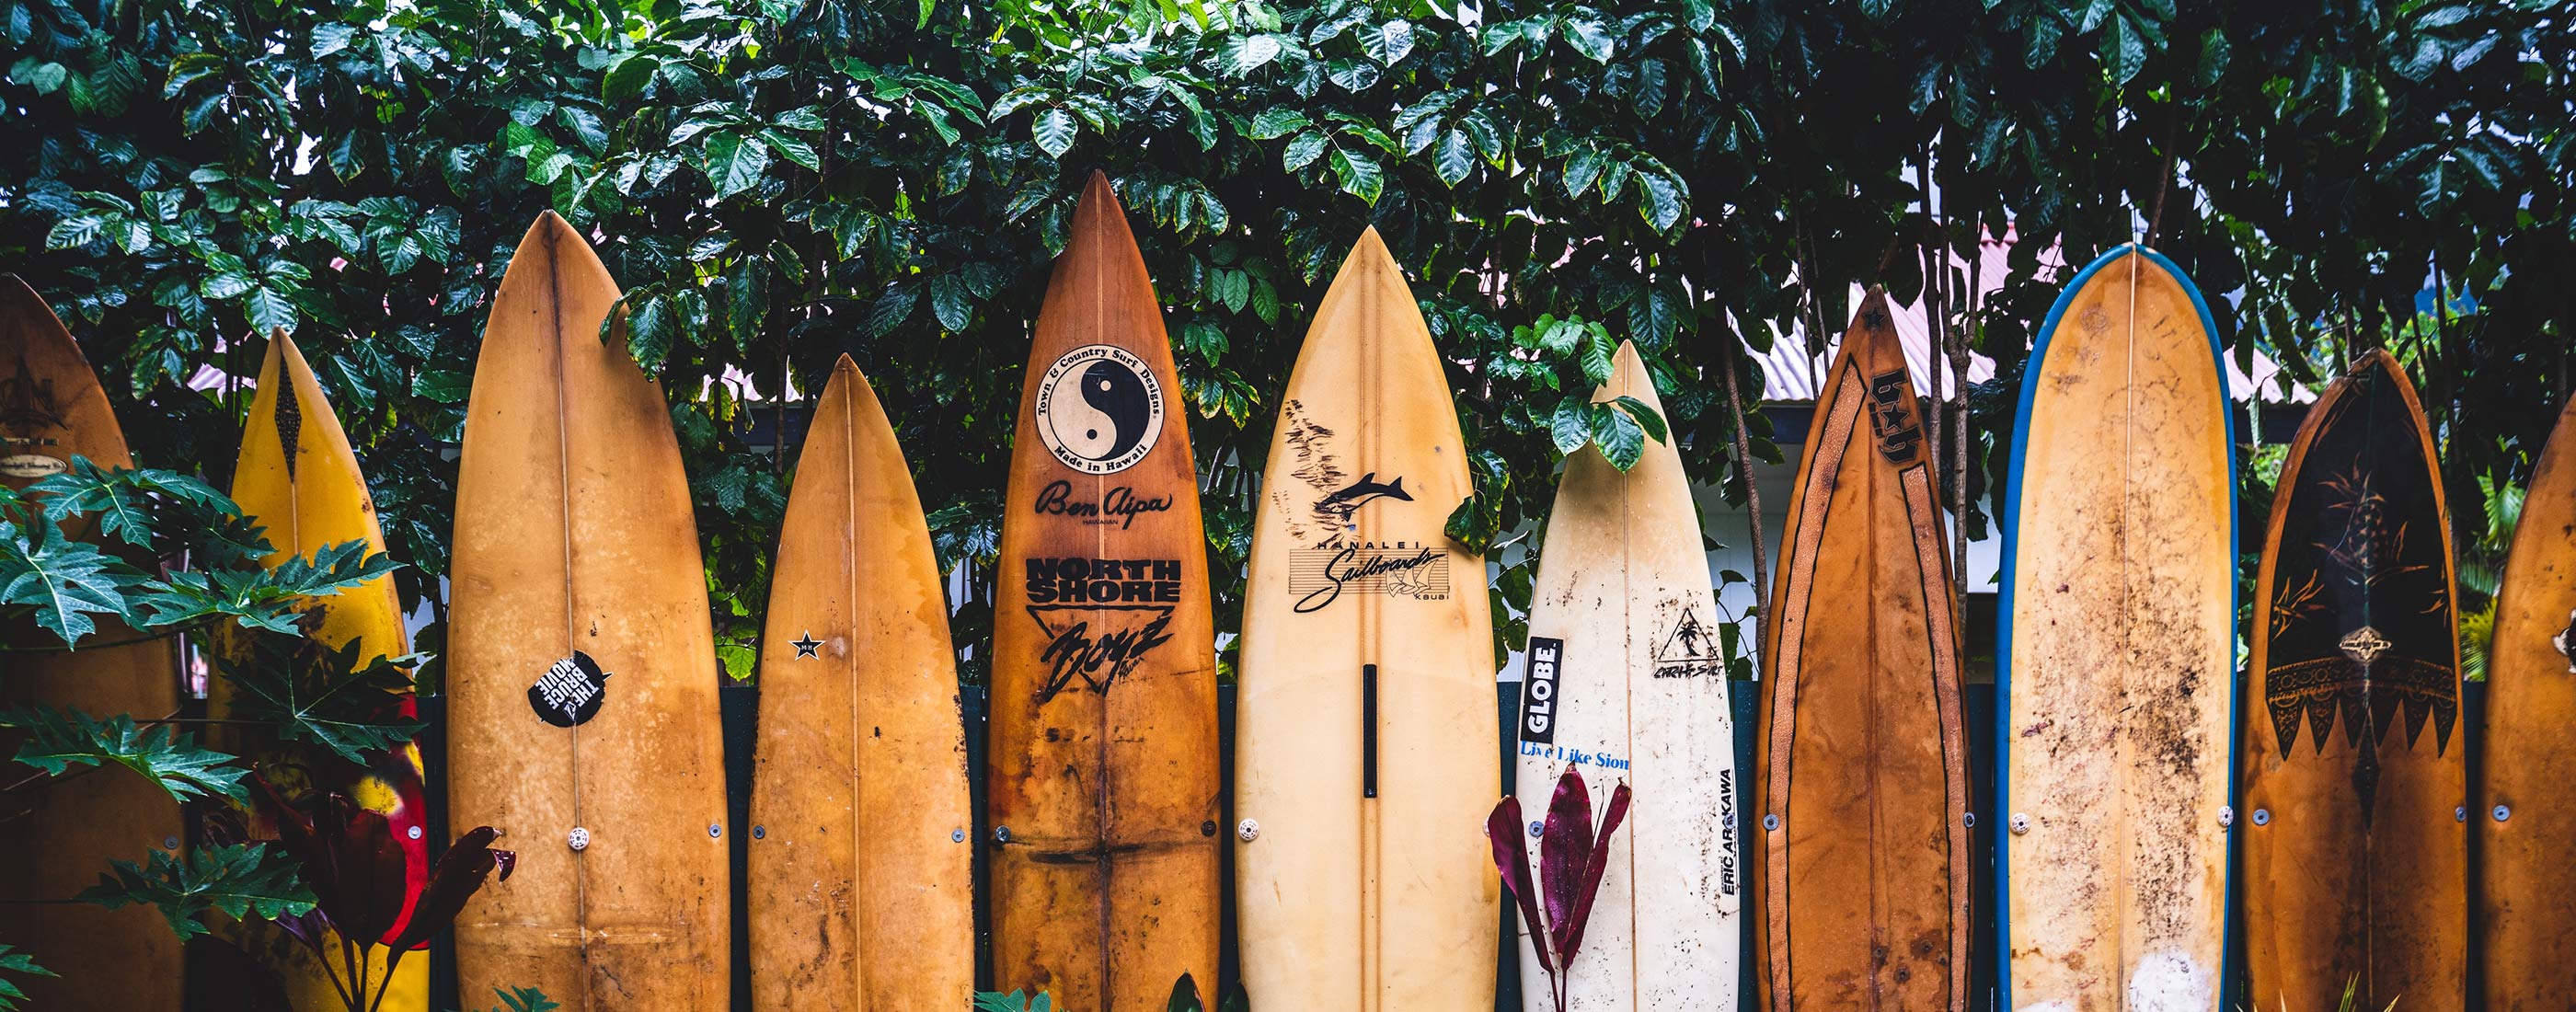 Line of surfboards along a fence